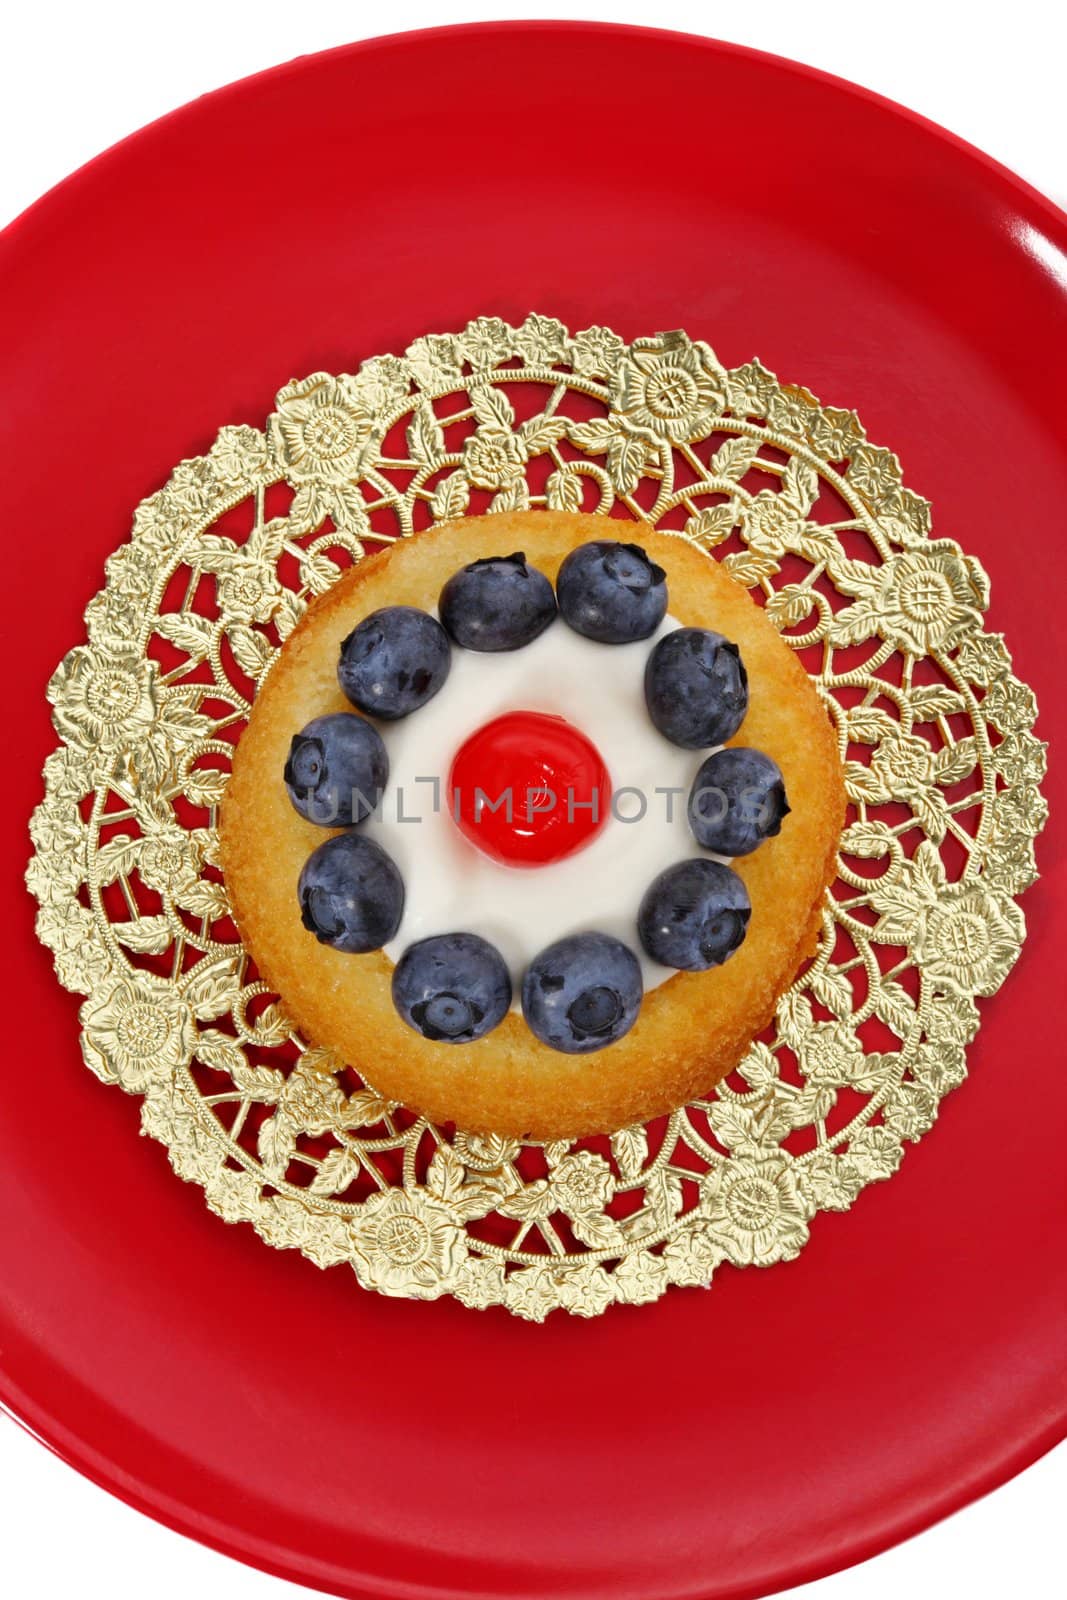 blueberry and cherry shortcake on red plate